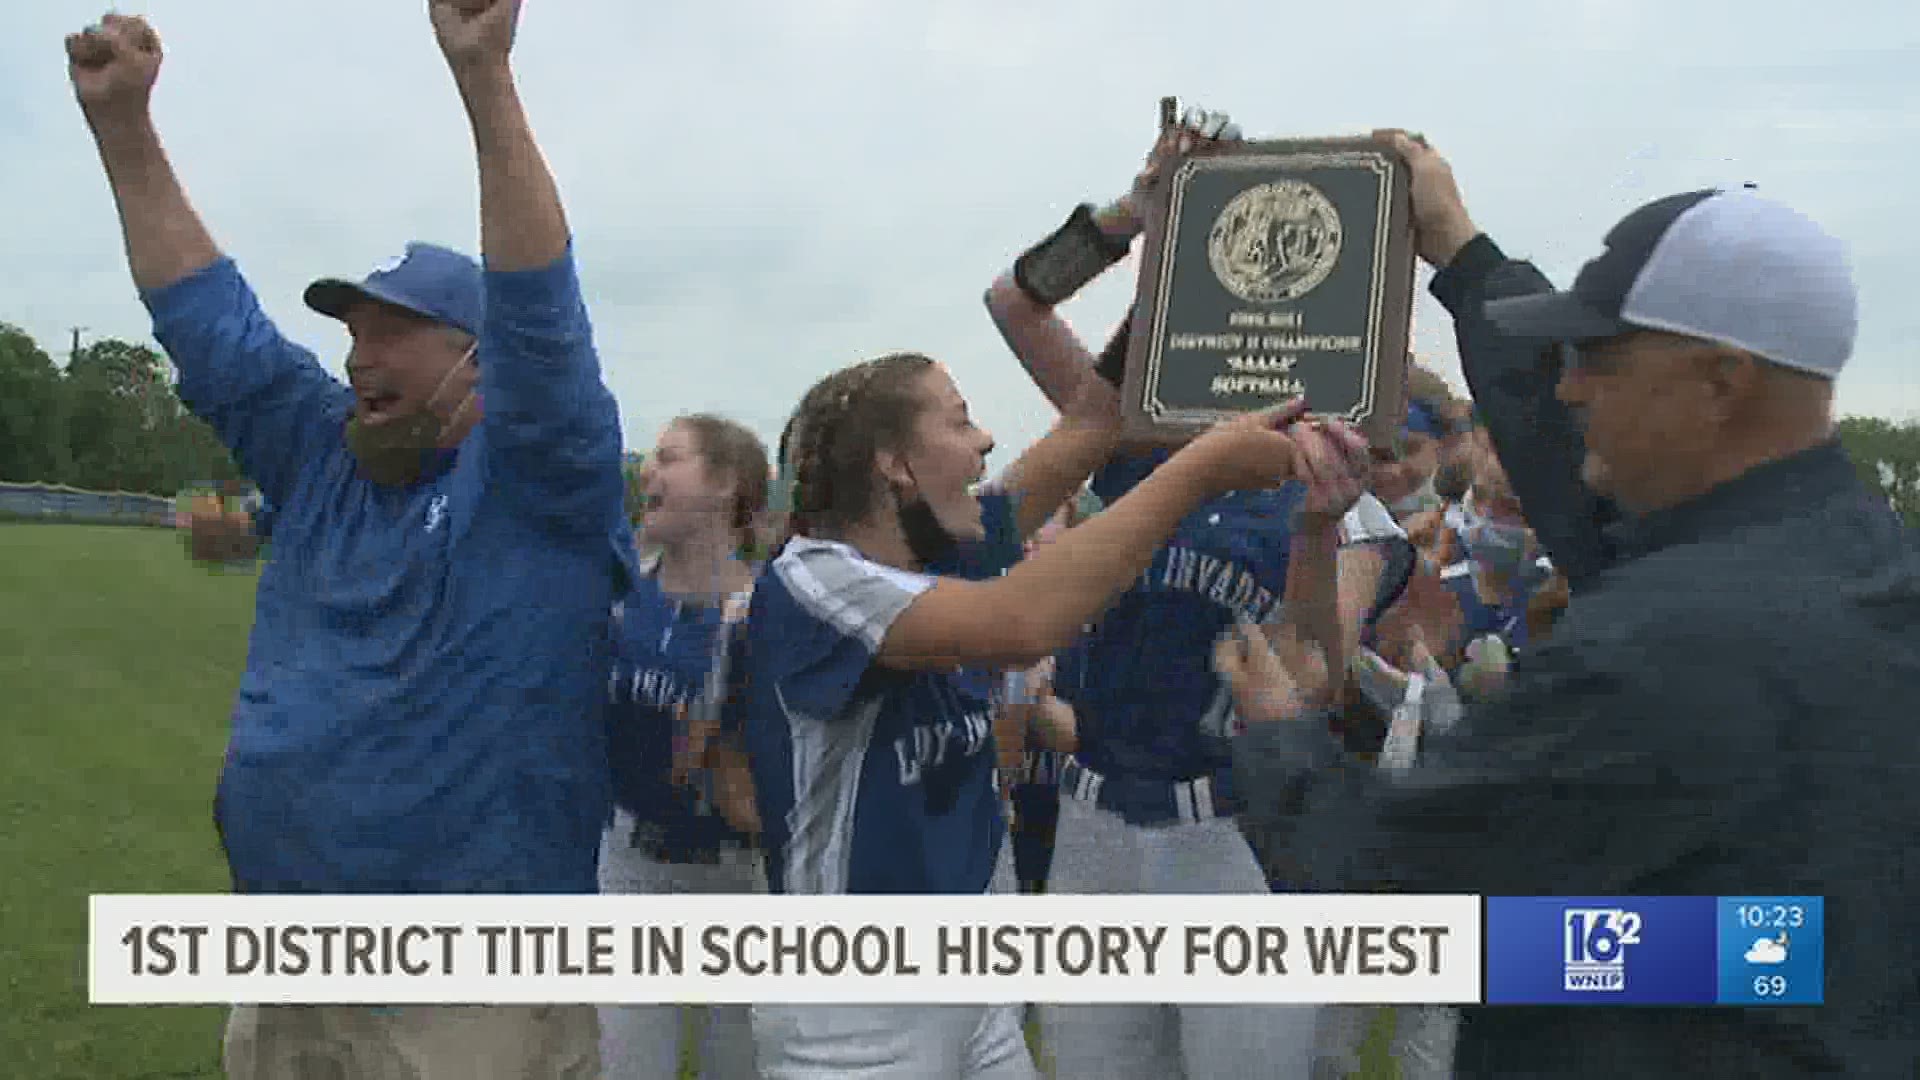 Mia Butka tossed a shutout, & Gianna Russo belted a Home Run as West Scranton won their first D-2 softball title with a 1-0 win over Abington Hts.